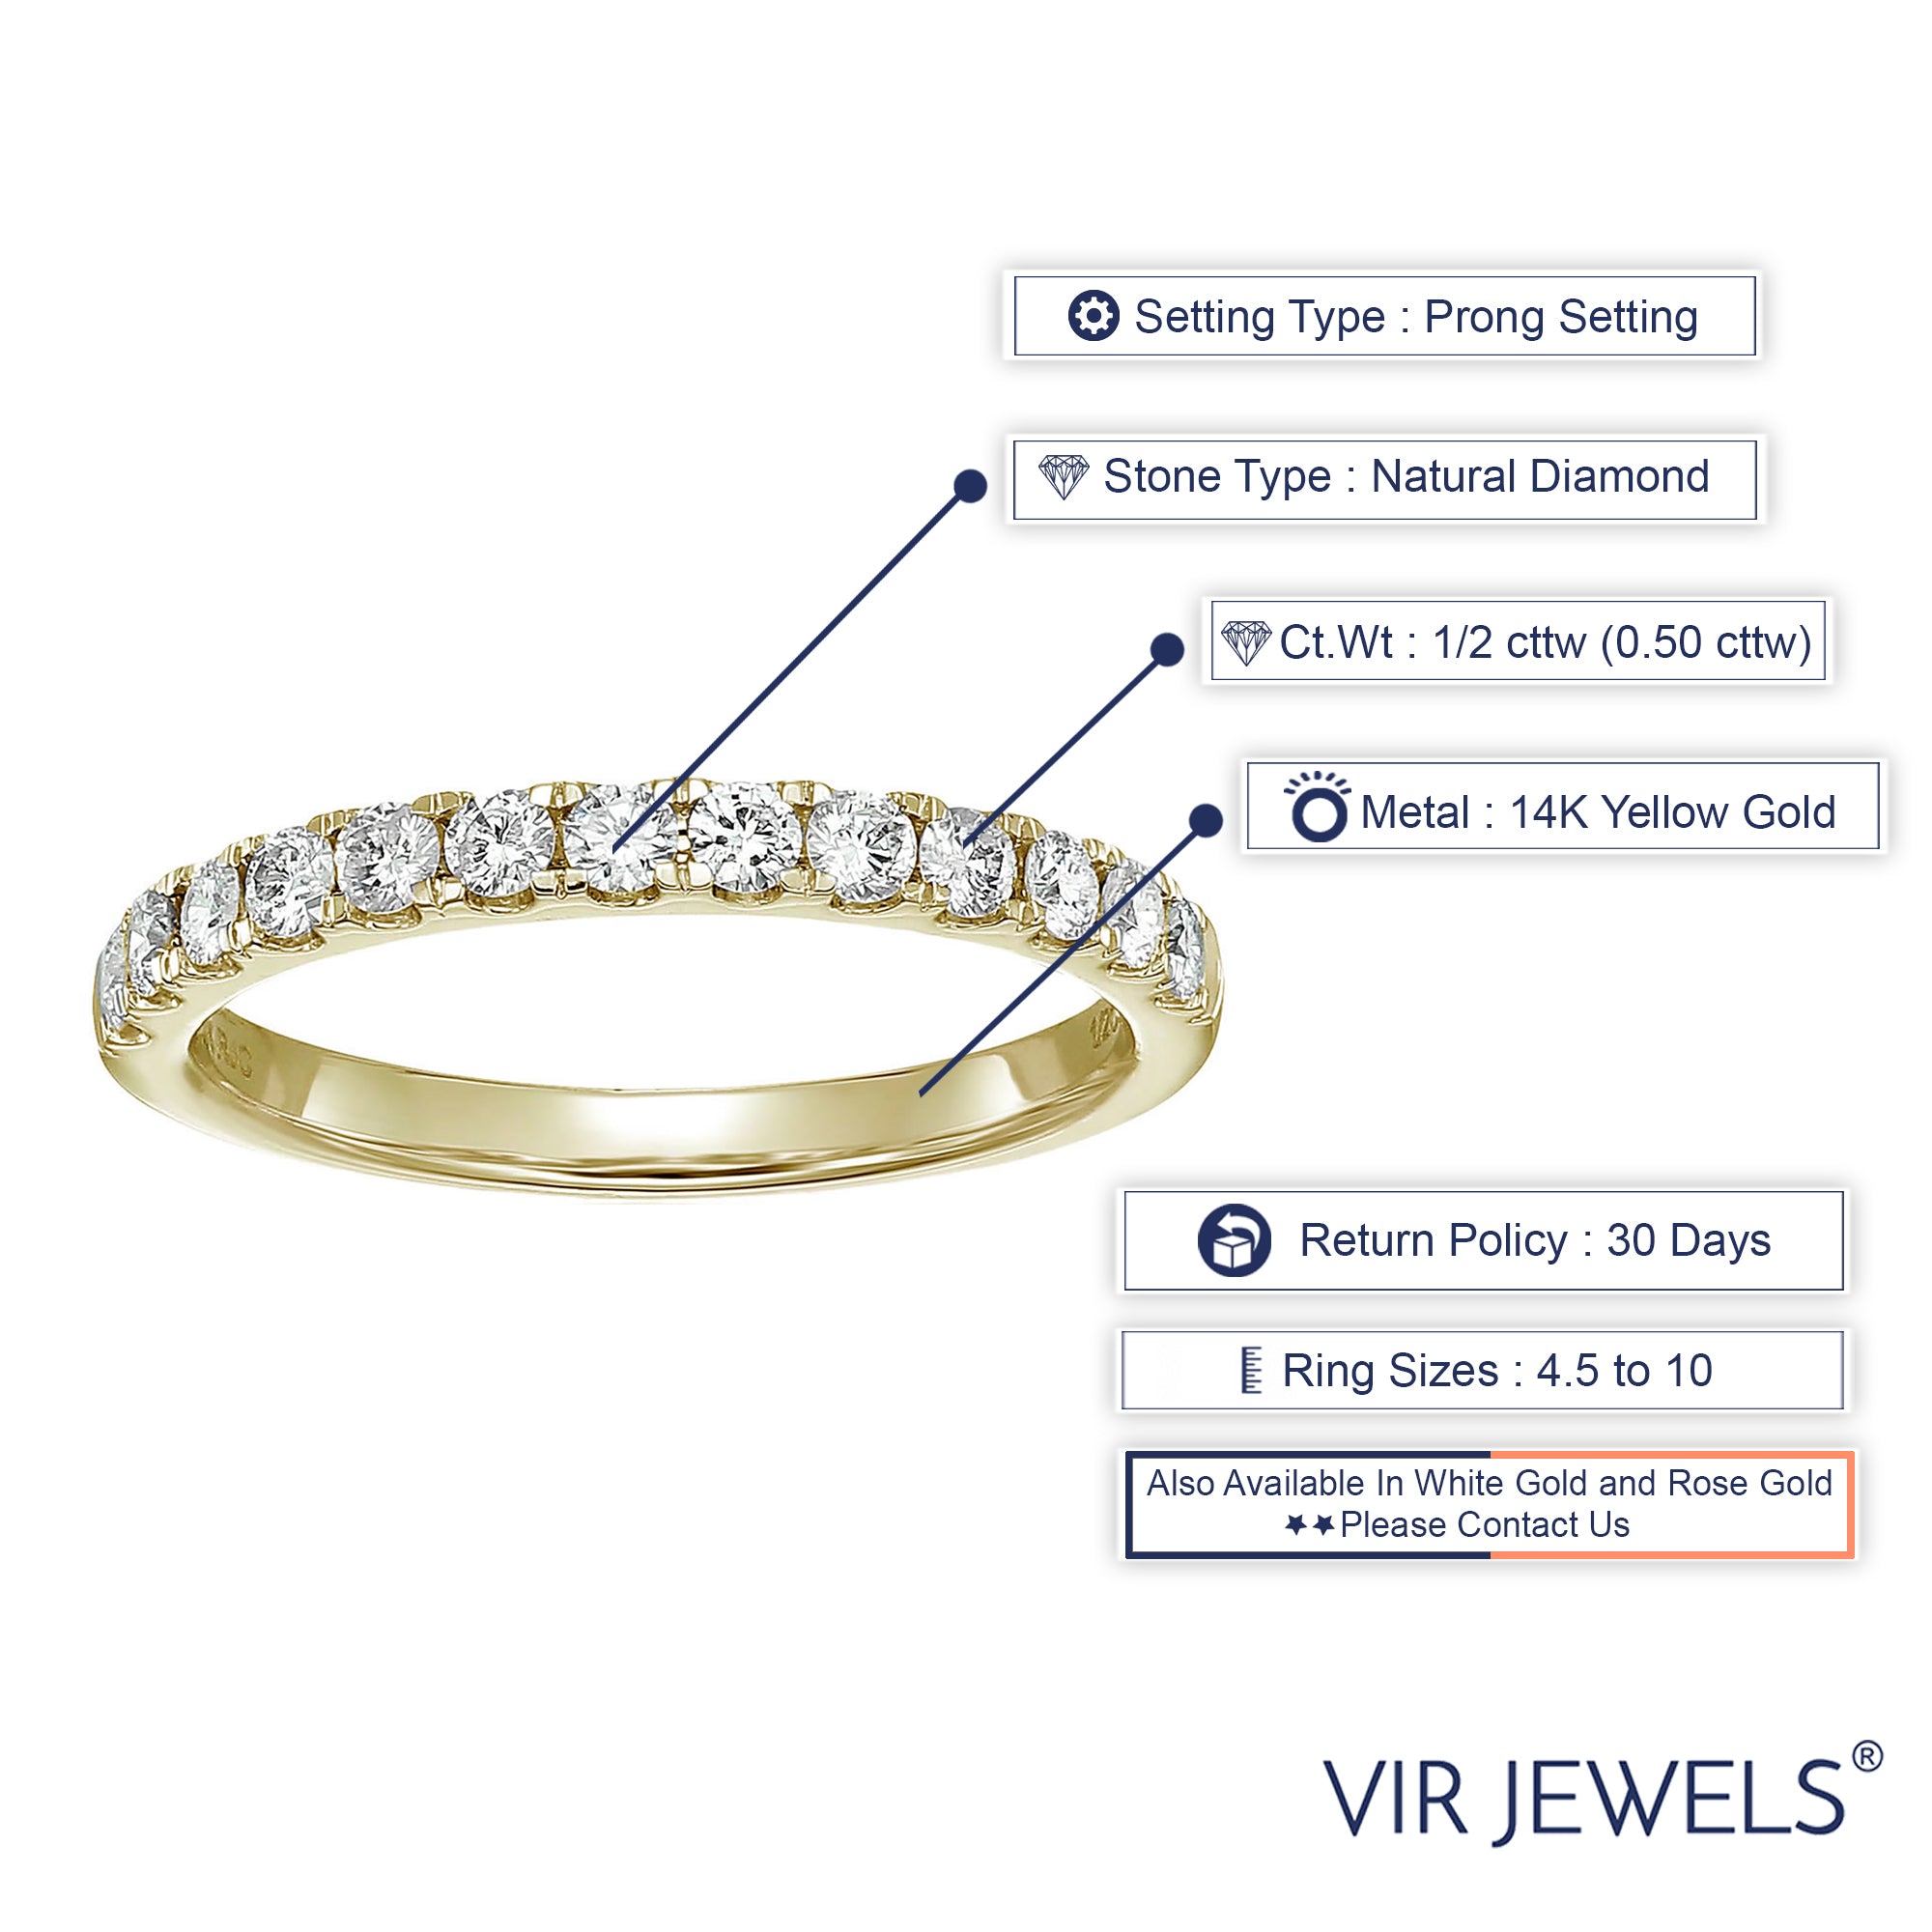 1/2 cttw Round Diamond Wedding Band for Women in 14K Yellow Gold 13 Stones Prong Set, Size 4-10